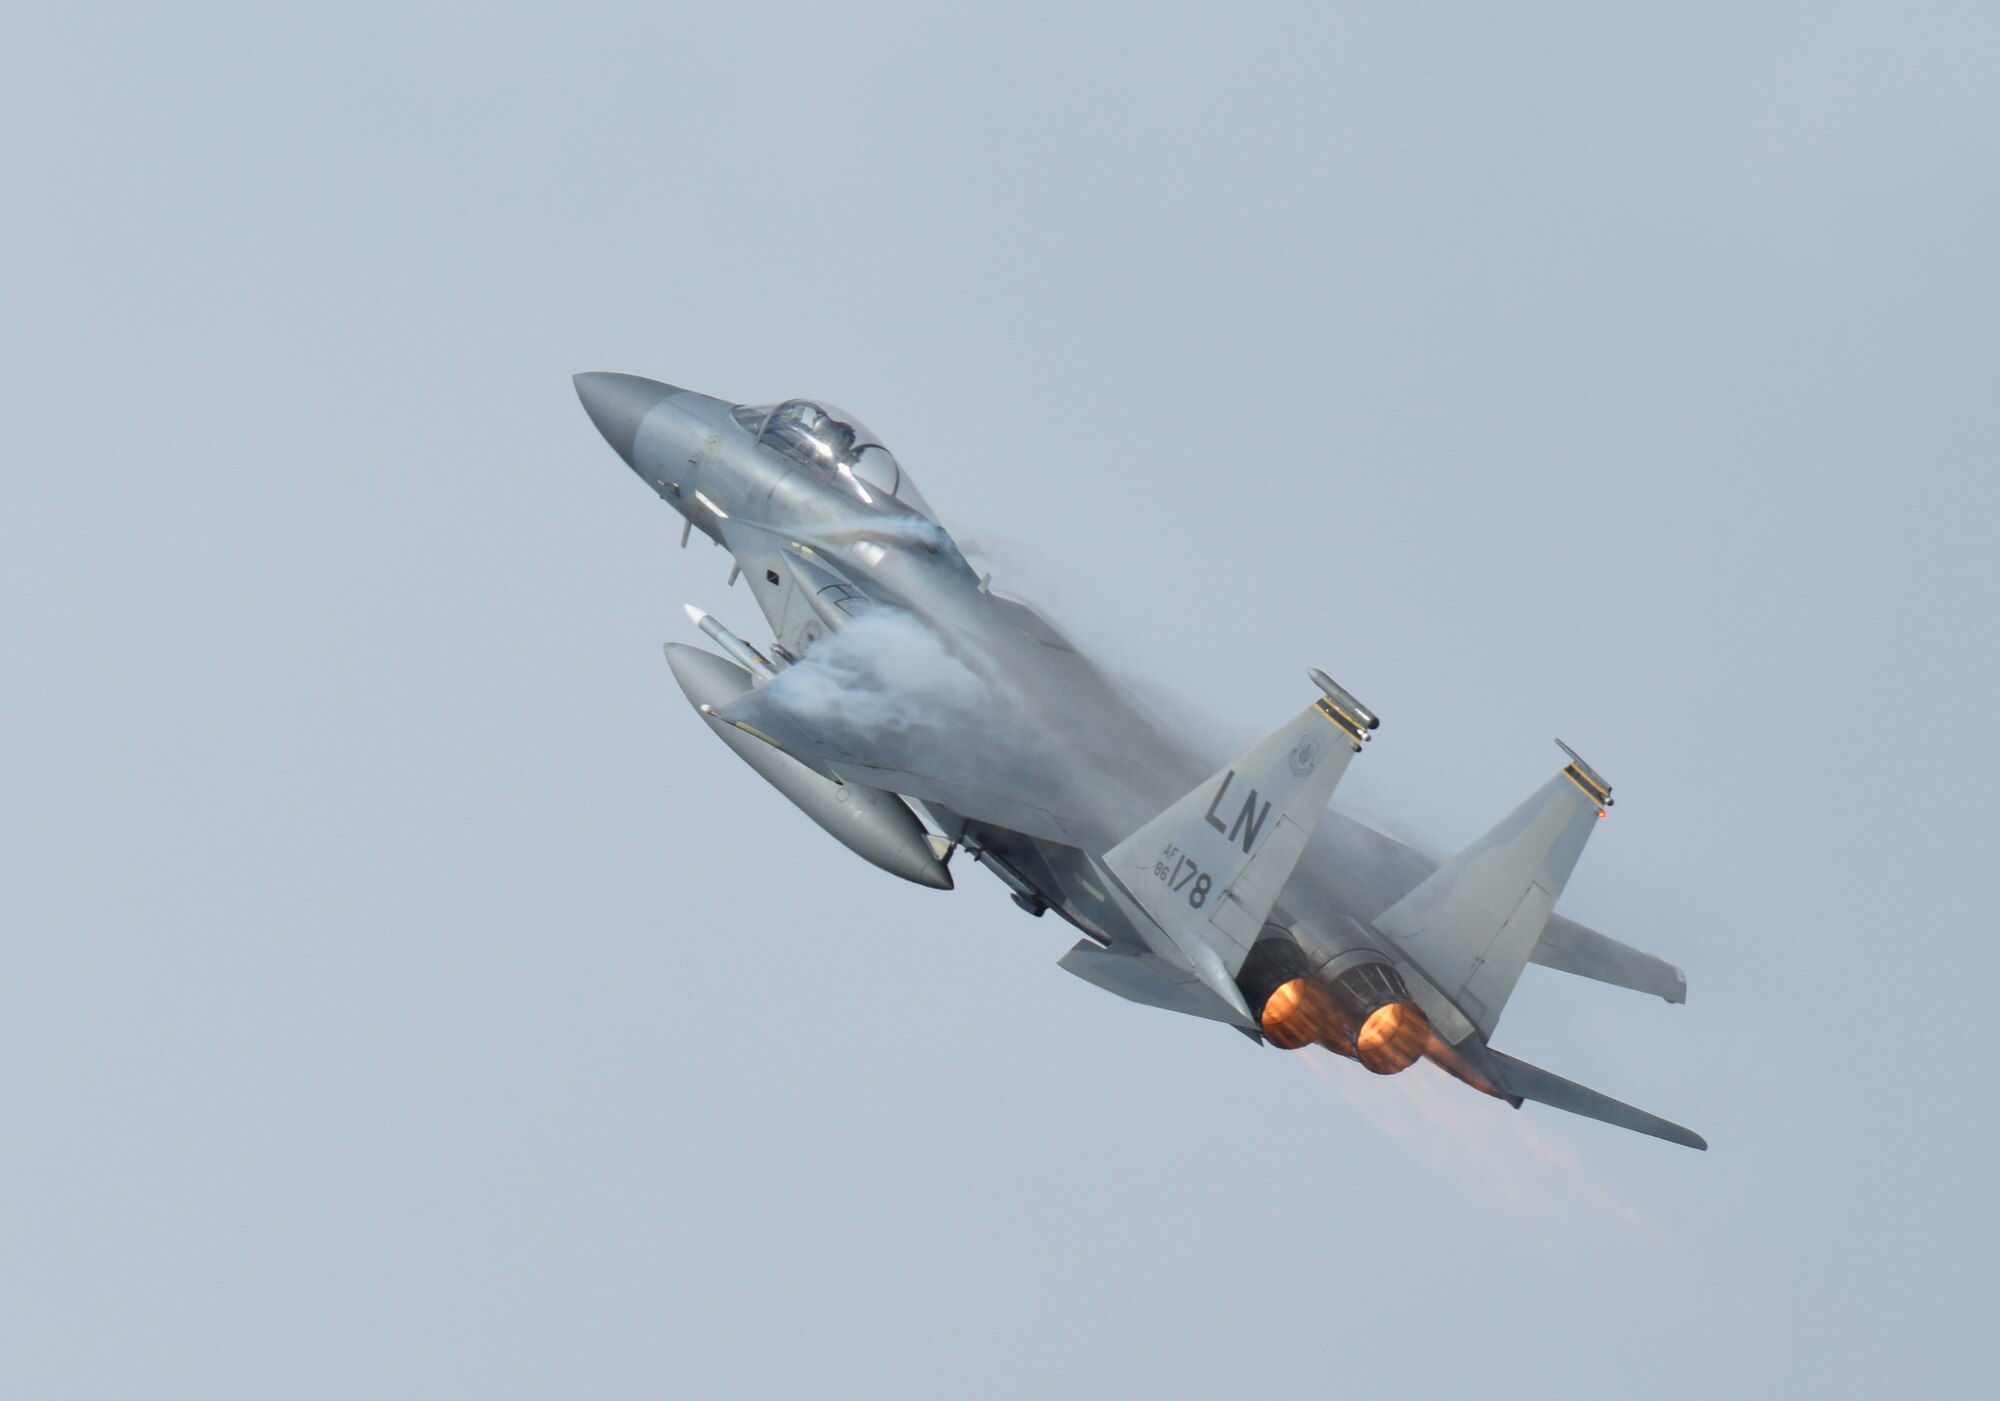 An F-15C Eagle assigned to the 493rd Expeditionary Fighter Squadron takes flight over Keflavik Air Base, Iceland, Aug. 2, 2018, in support of NATO’s Icelandic Air Surveillance mission. While providing critical infrastructure and support, Iceland has looked to its NATO allies to provide airborne surveillance and interception capabilities to meet its peacetime preparedness needs since 2008. (U.S. Air Force photo/Staff Sgt. Alex Fox Echols III)